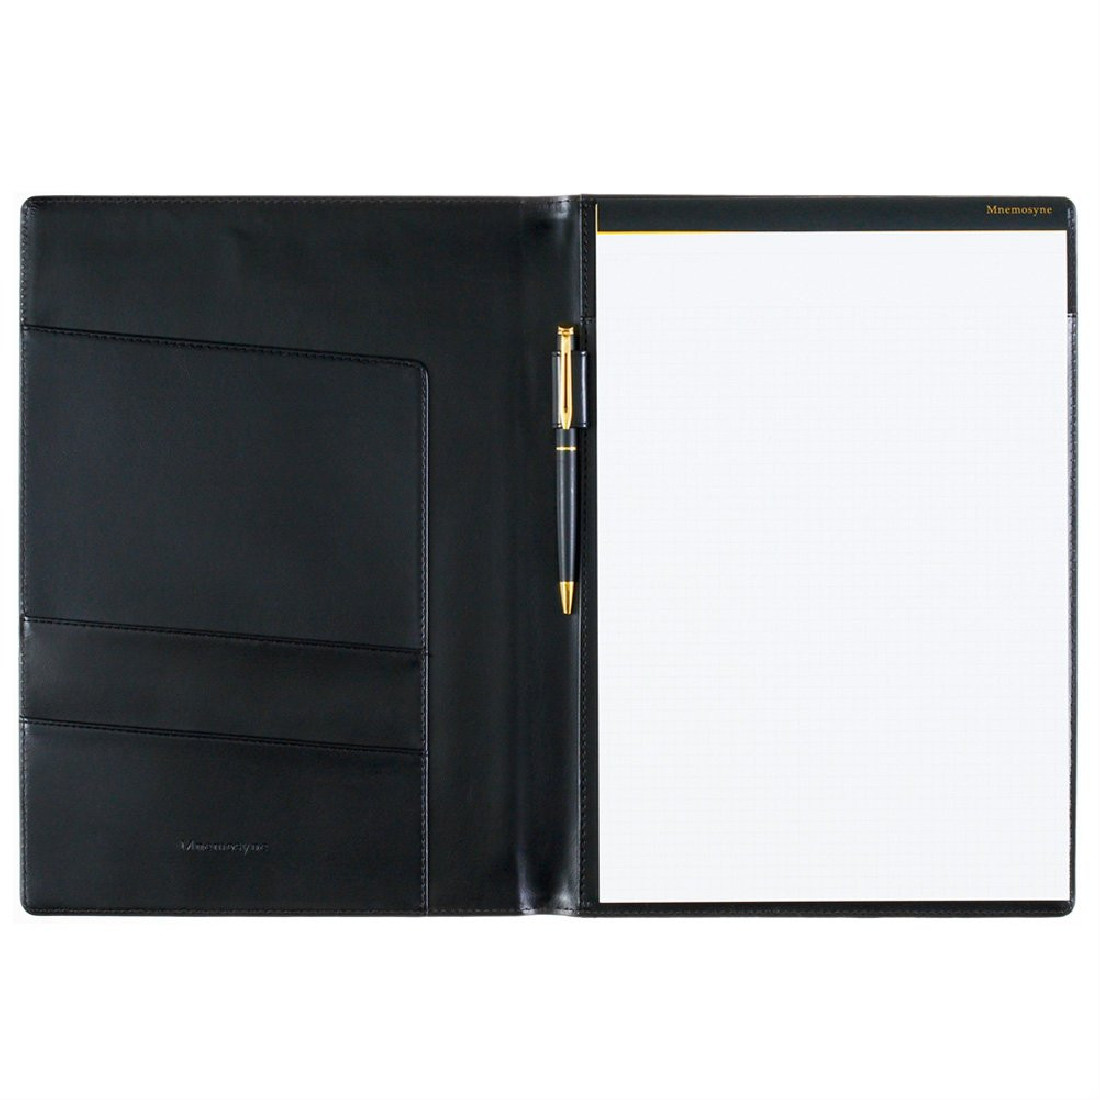 Mnemosyne Μemo Pad plus Synthetic Leather Holder HN187UA-05 A4 70sheets 5mm squared 80gr